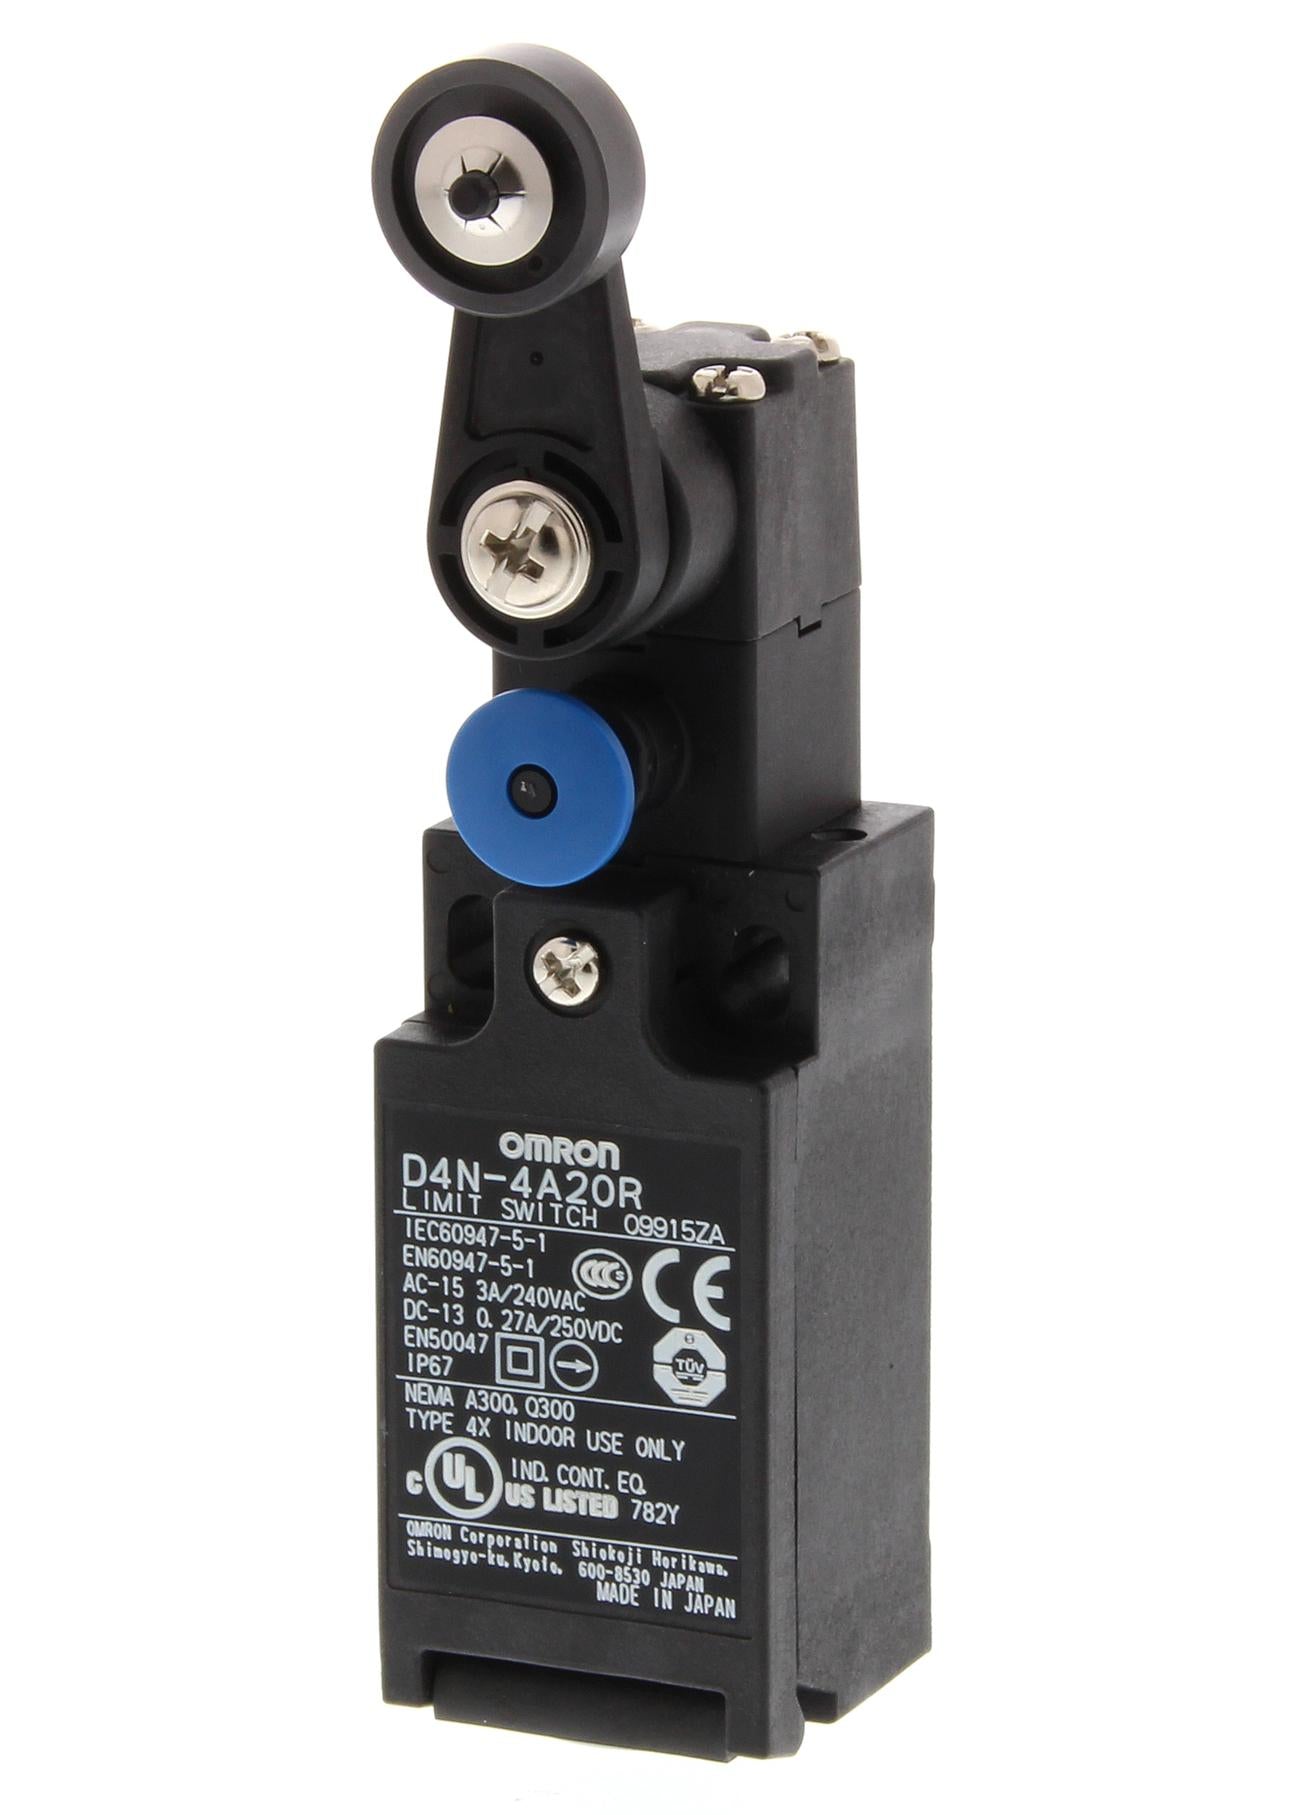 D4N-4A20R LIMIT SWITCH SWITCHES OMRON